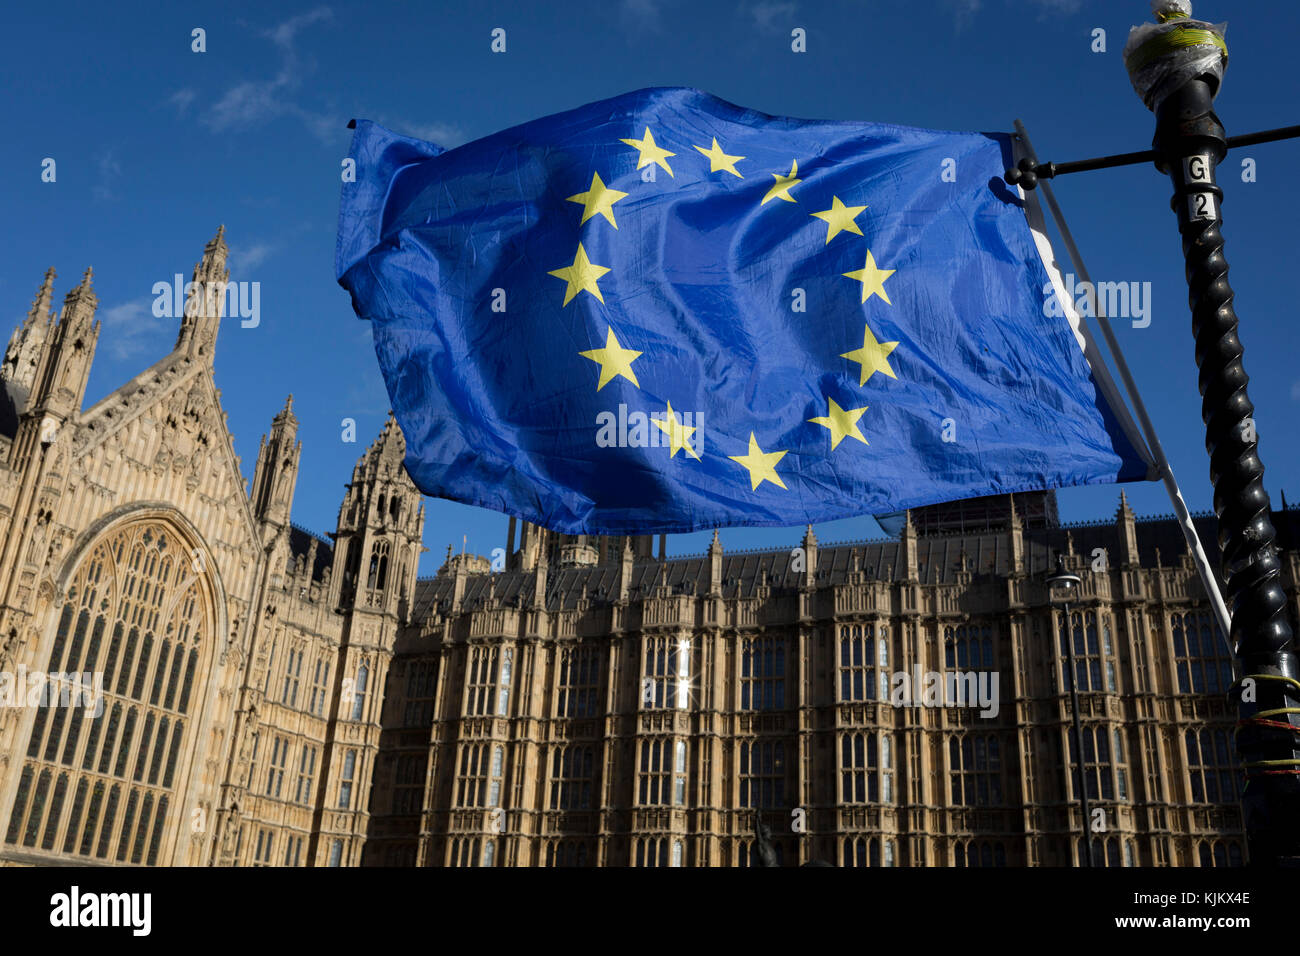 The stars of the EU flag fly over the Houses of Parliament in Westminster, seat of government and power of the United Kingdom during Brexit negotiations with Brussels, on 23rd November 2017, in London England. Stock Photo